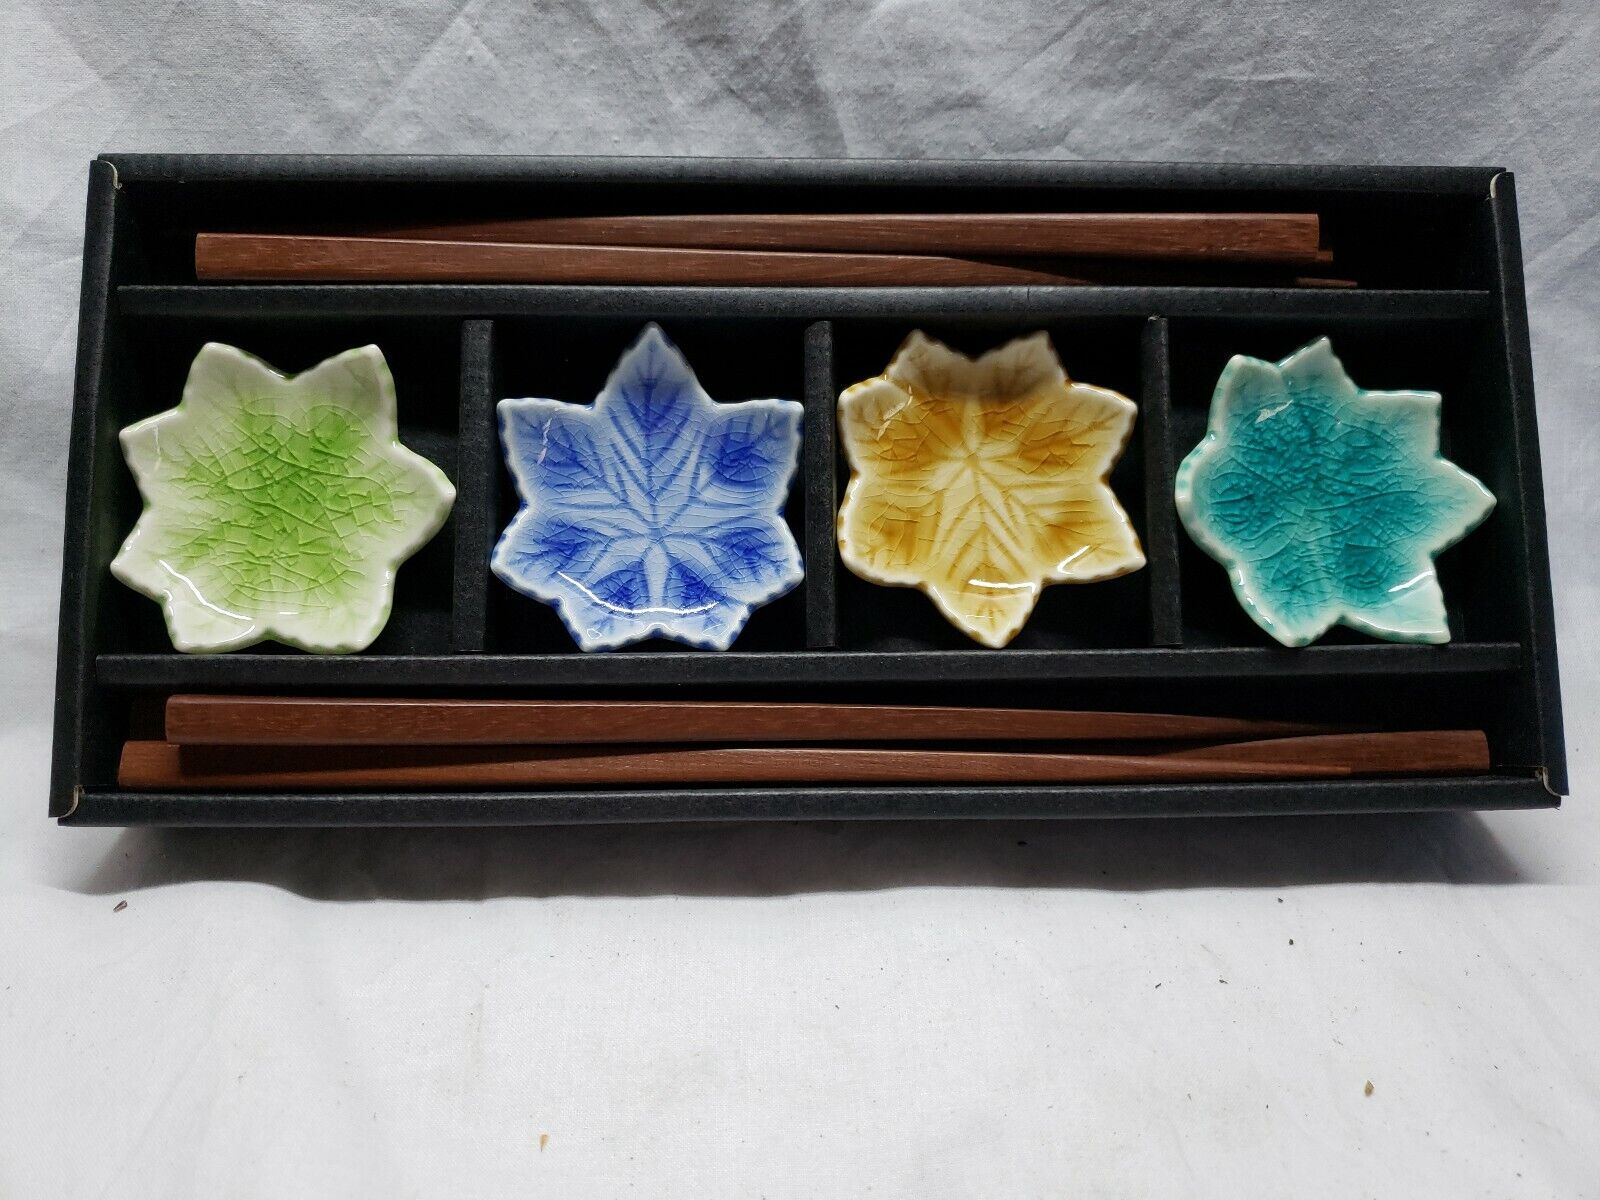 Vintage Wooden Chopsticks And Ceramic Maple Leaf Rests In A Gift Box